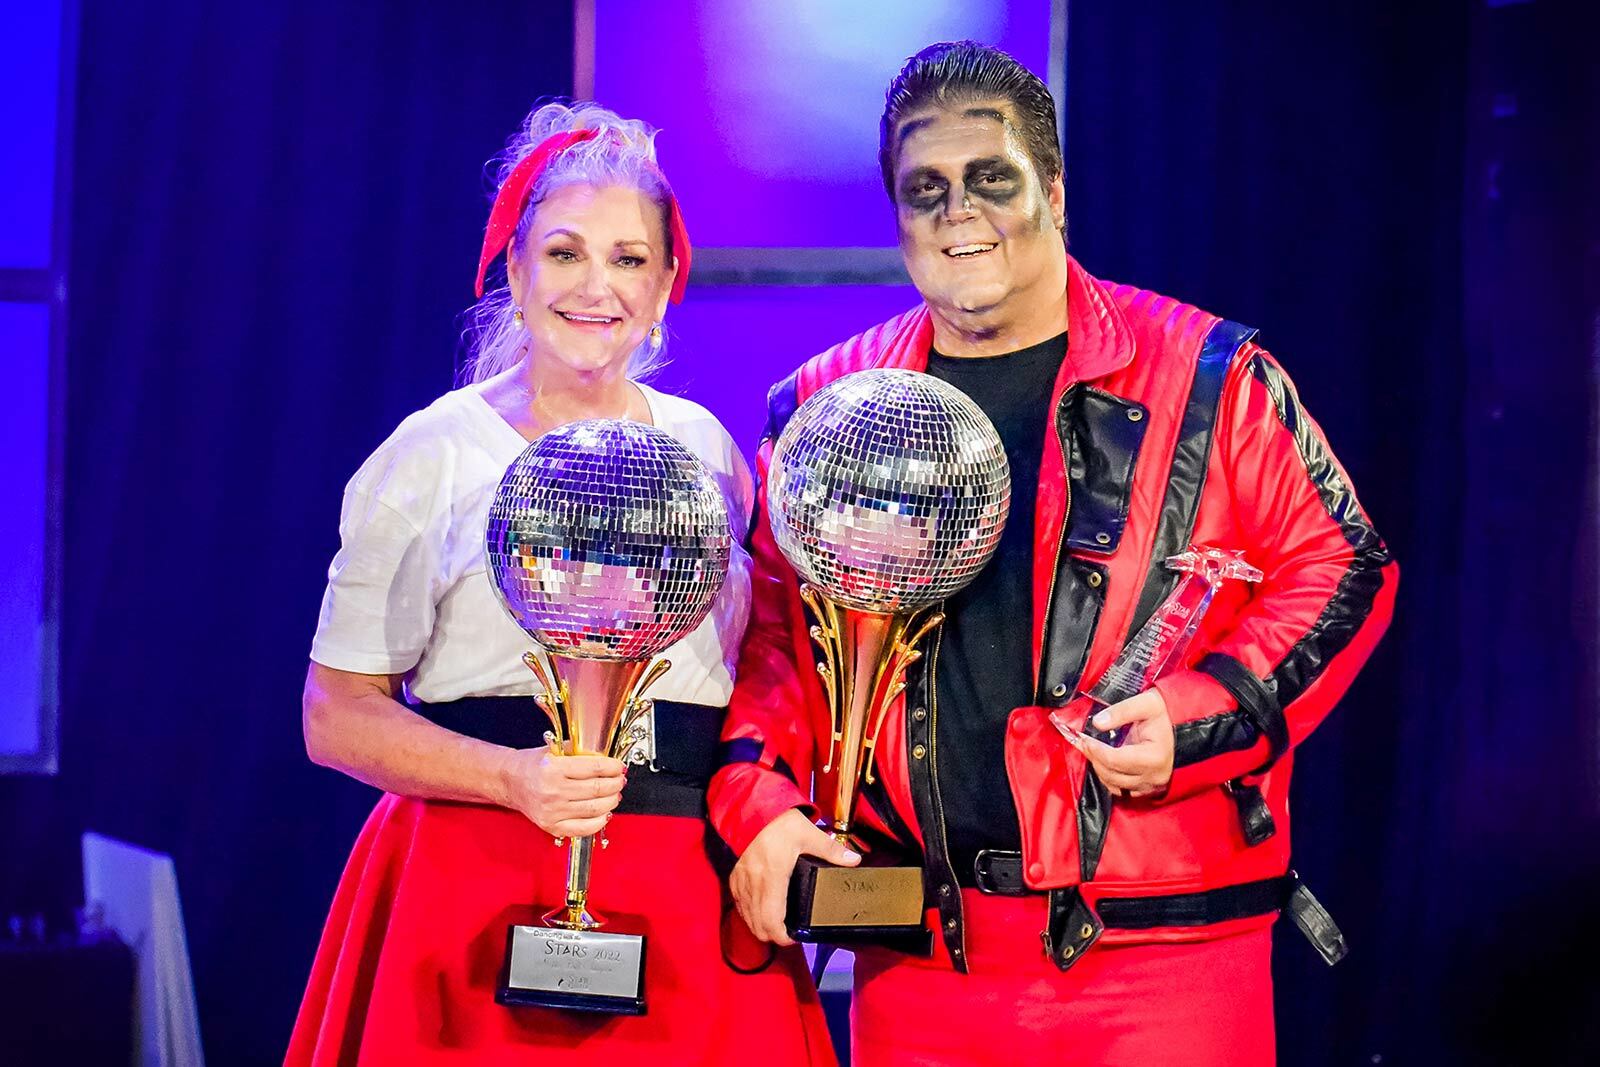 Jonathan and Marda with mirror ball trophies